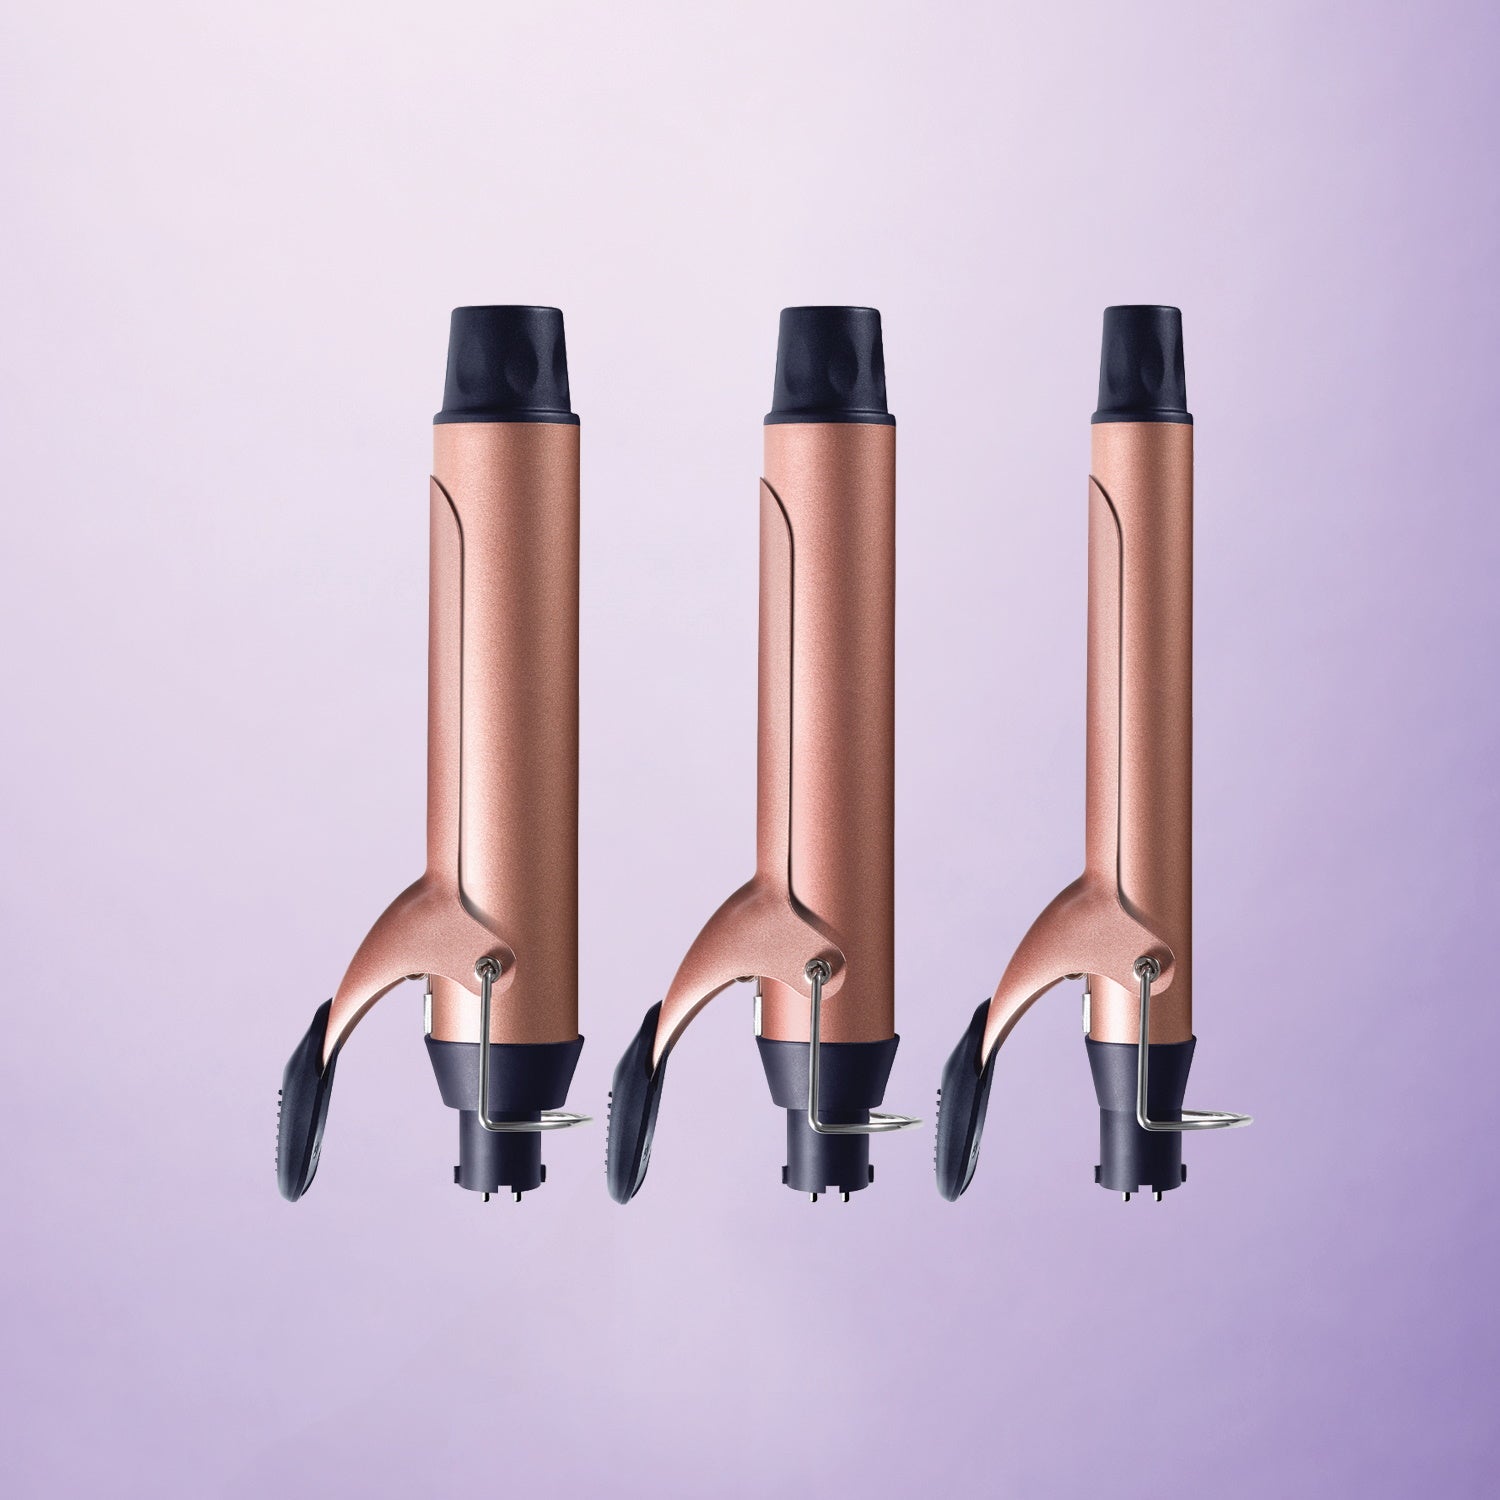 What Size Curling Iron Should I Use?